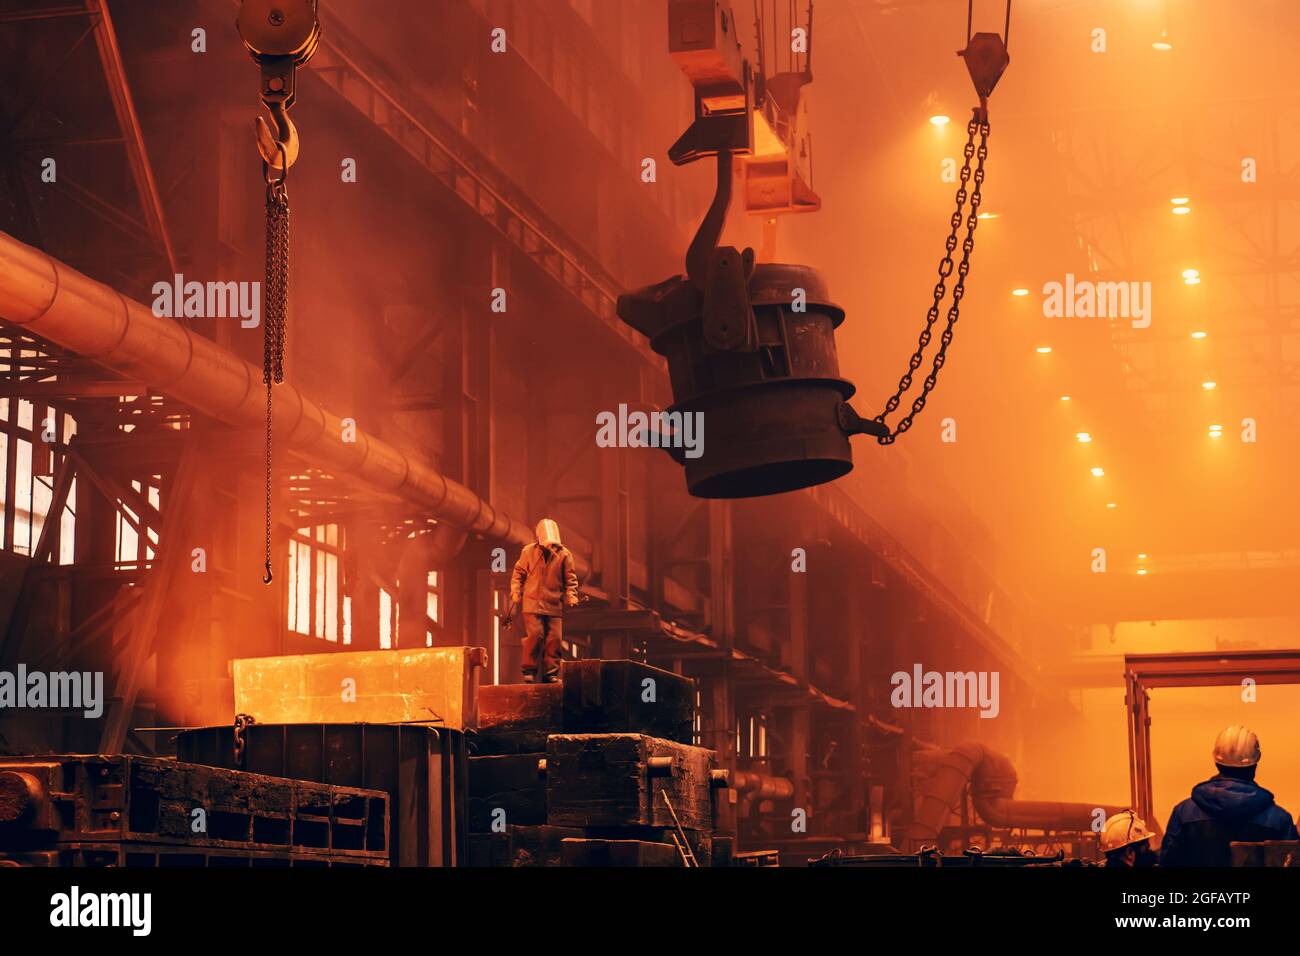 Foundry workshop. Metallurgical plant. Heavy Metallurgy industry background. Stock Photo